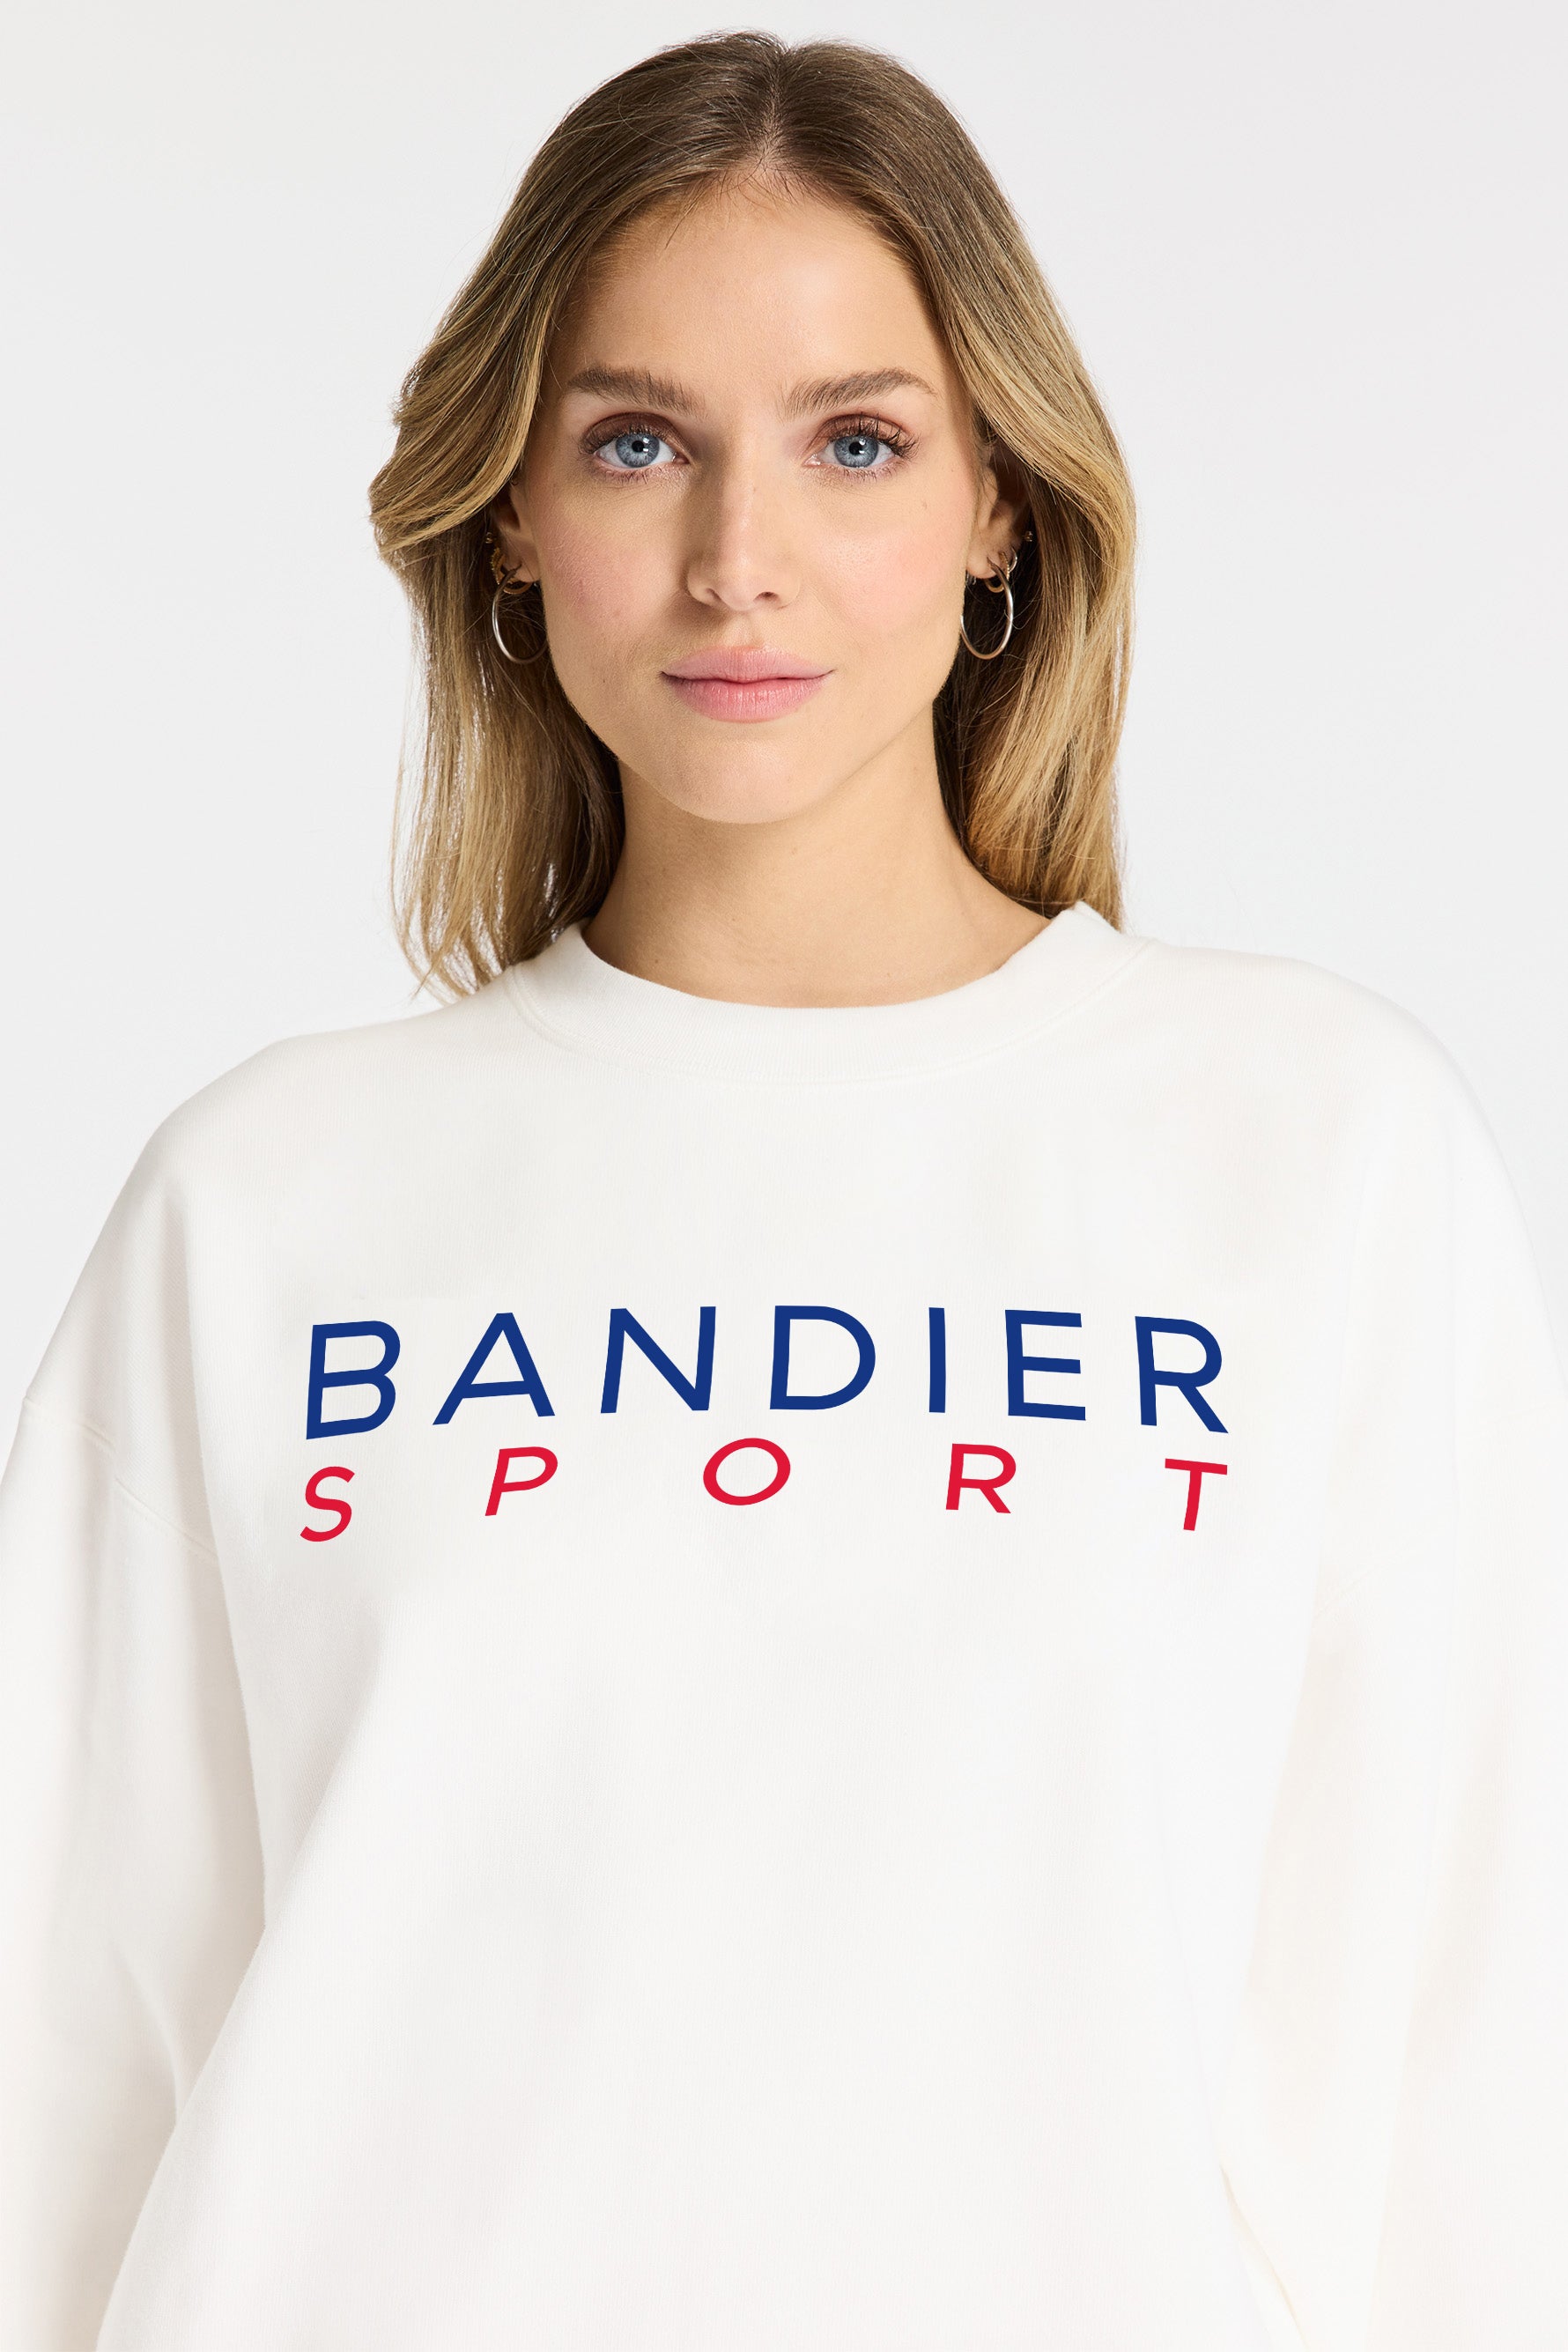 Model wearing Bandier x Michelob ULTRA Sweatshirt, front view with "BANDIER SPORT" in red and blue across center chest